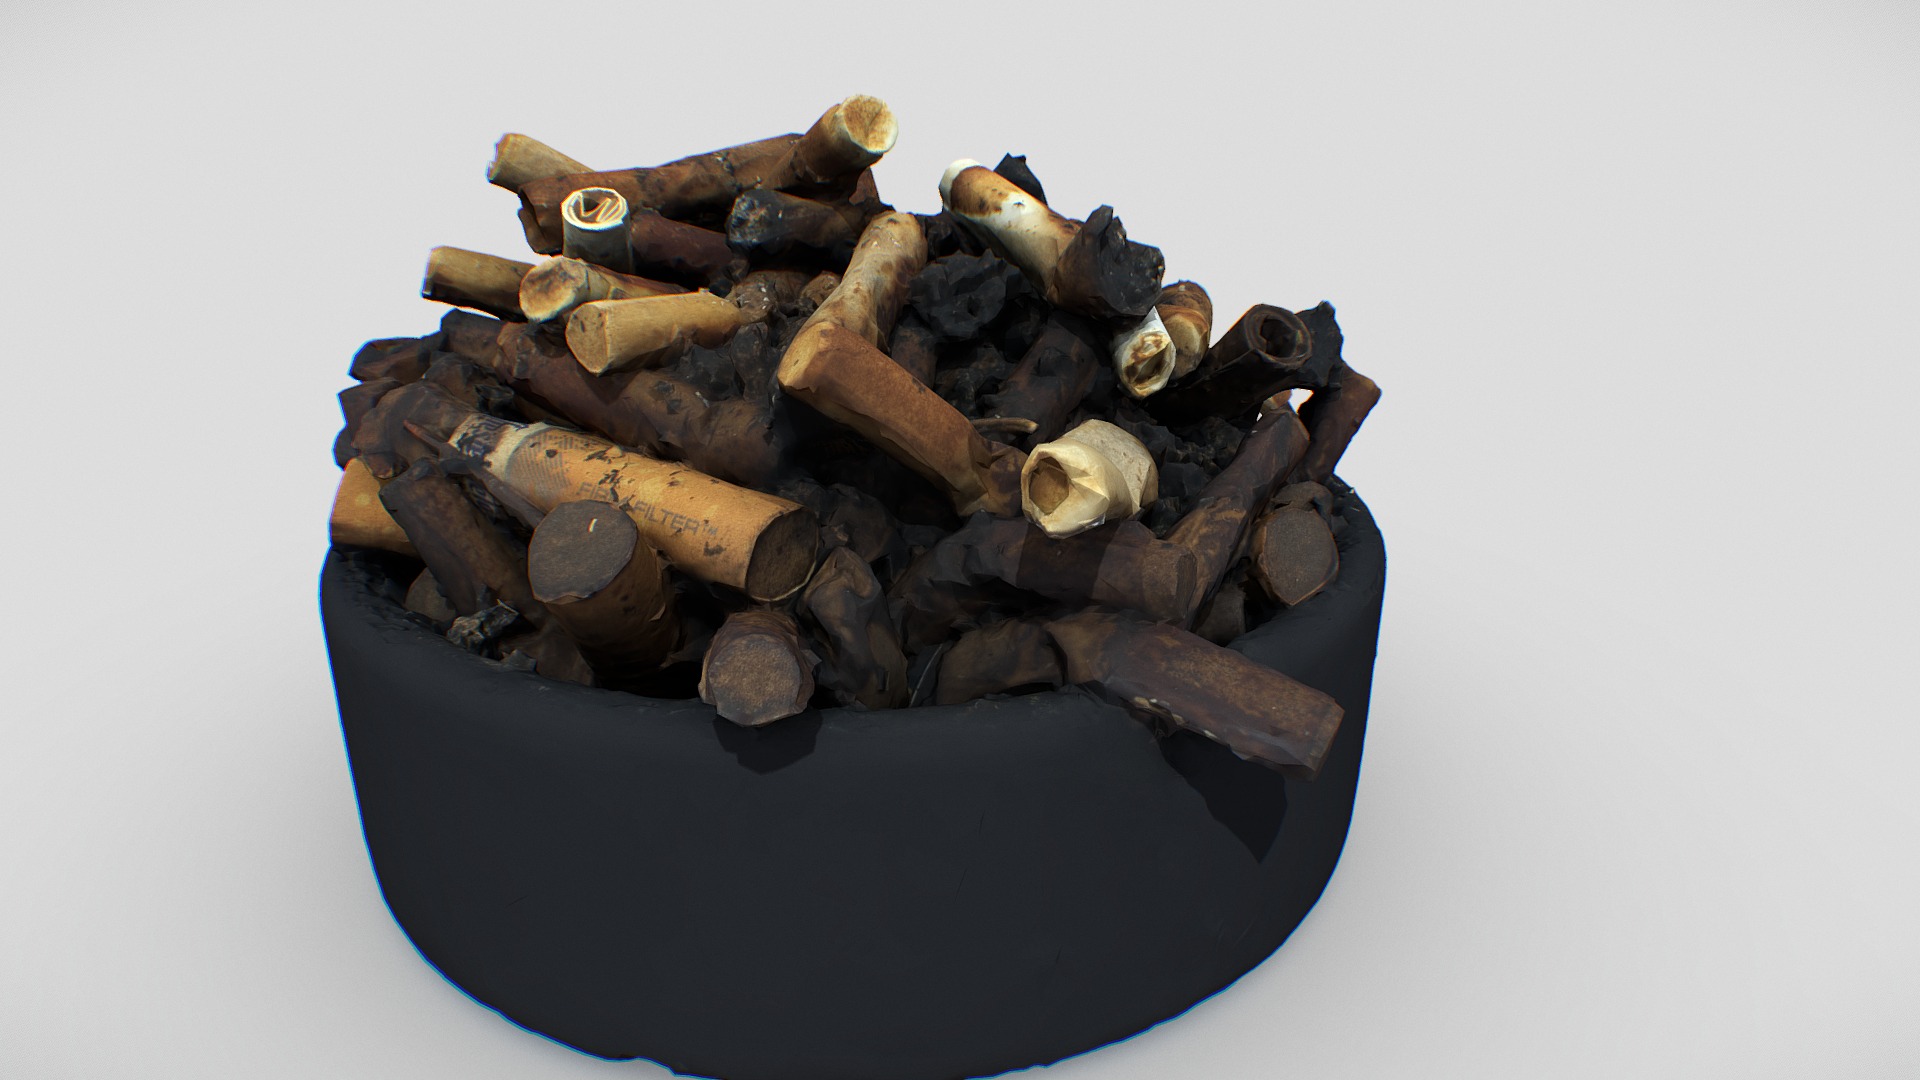 3D model 8K – Ashtray - This is a 3D model of the 8K - Ashtray. The 3D model is about a pile of cigarettes.